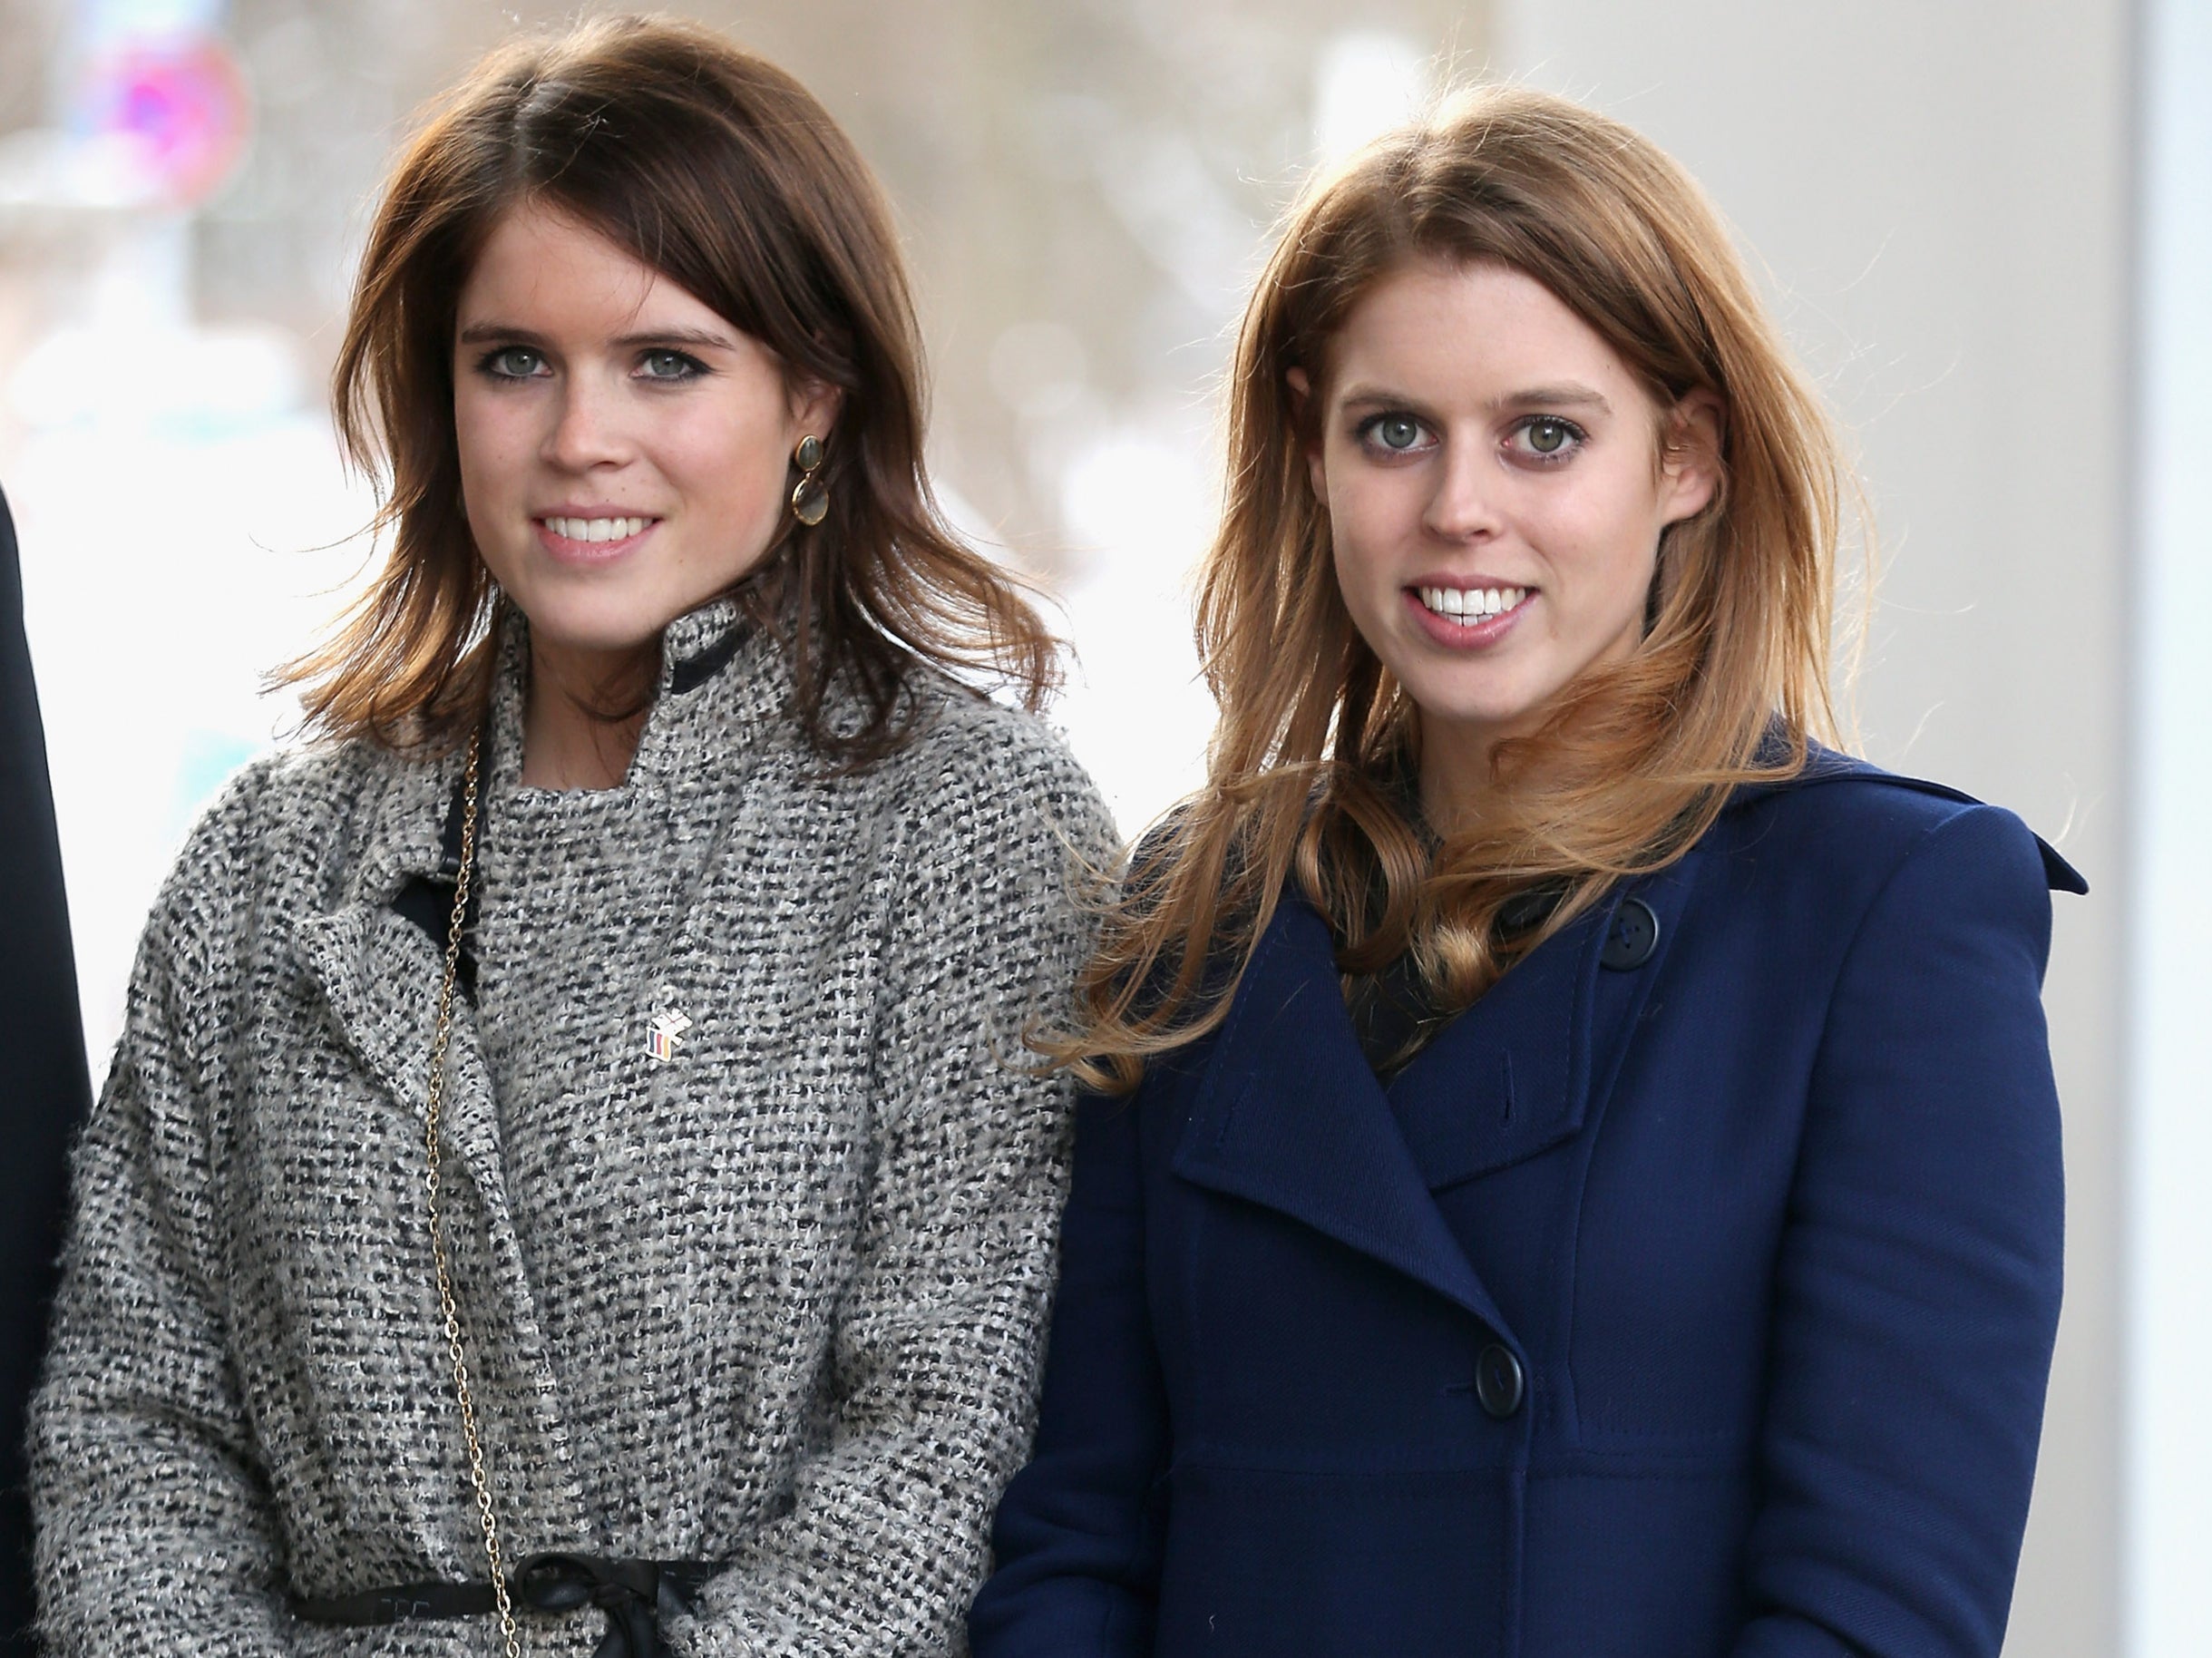 Princess Beatrice (R) and Princess Eugenie arrive to call on Minister David McAllister of Lower Saxony on January 18, 2013 in Hanover